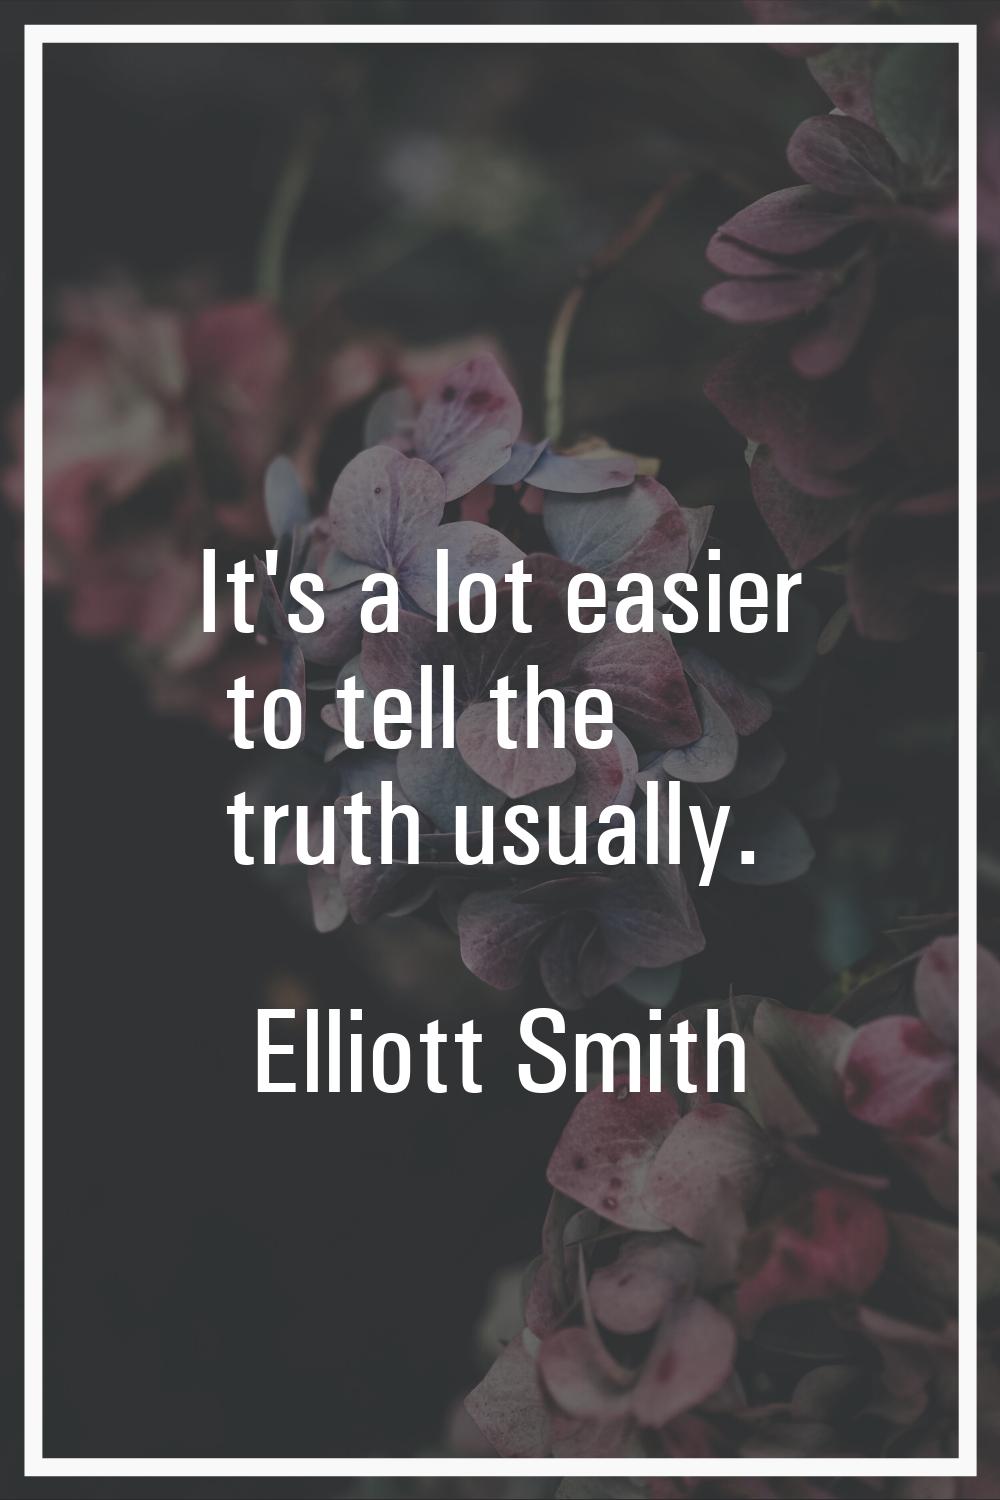 It's a lot easier to tell the truth usually.